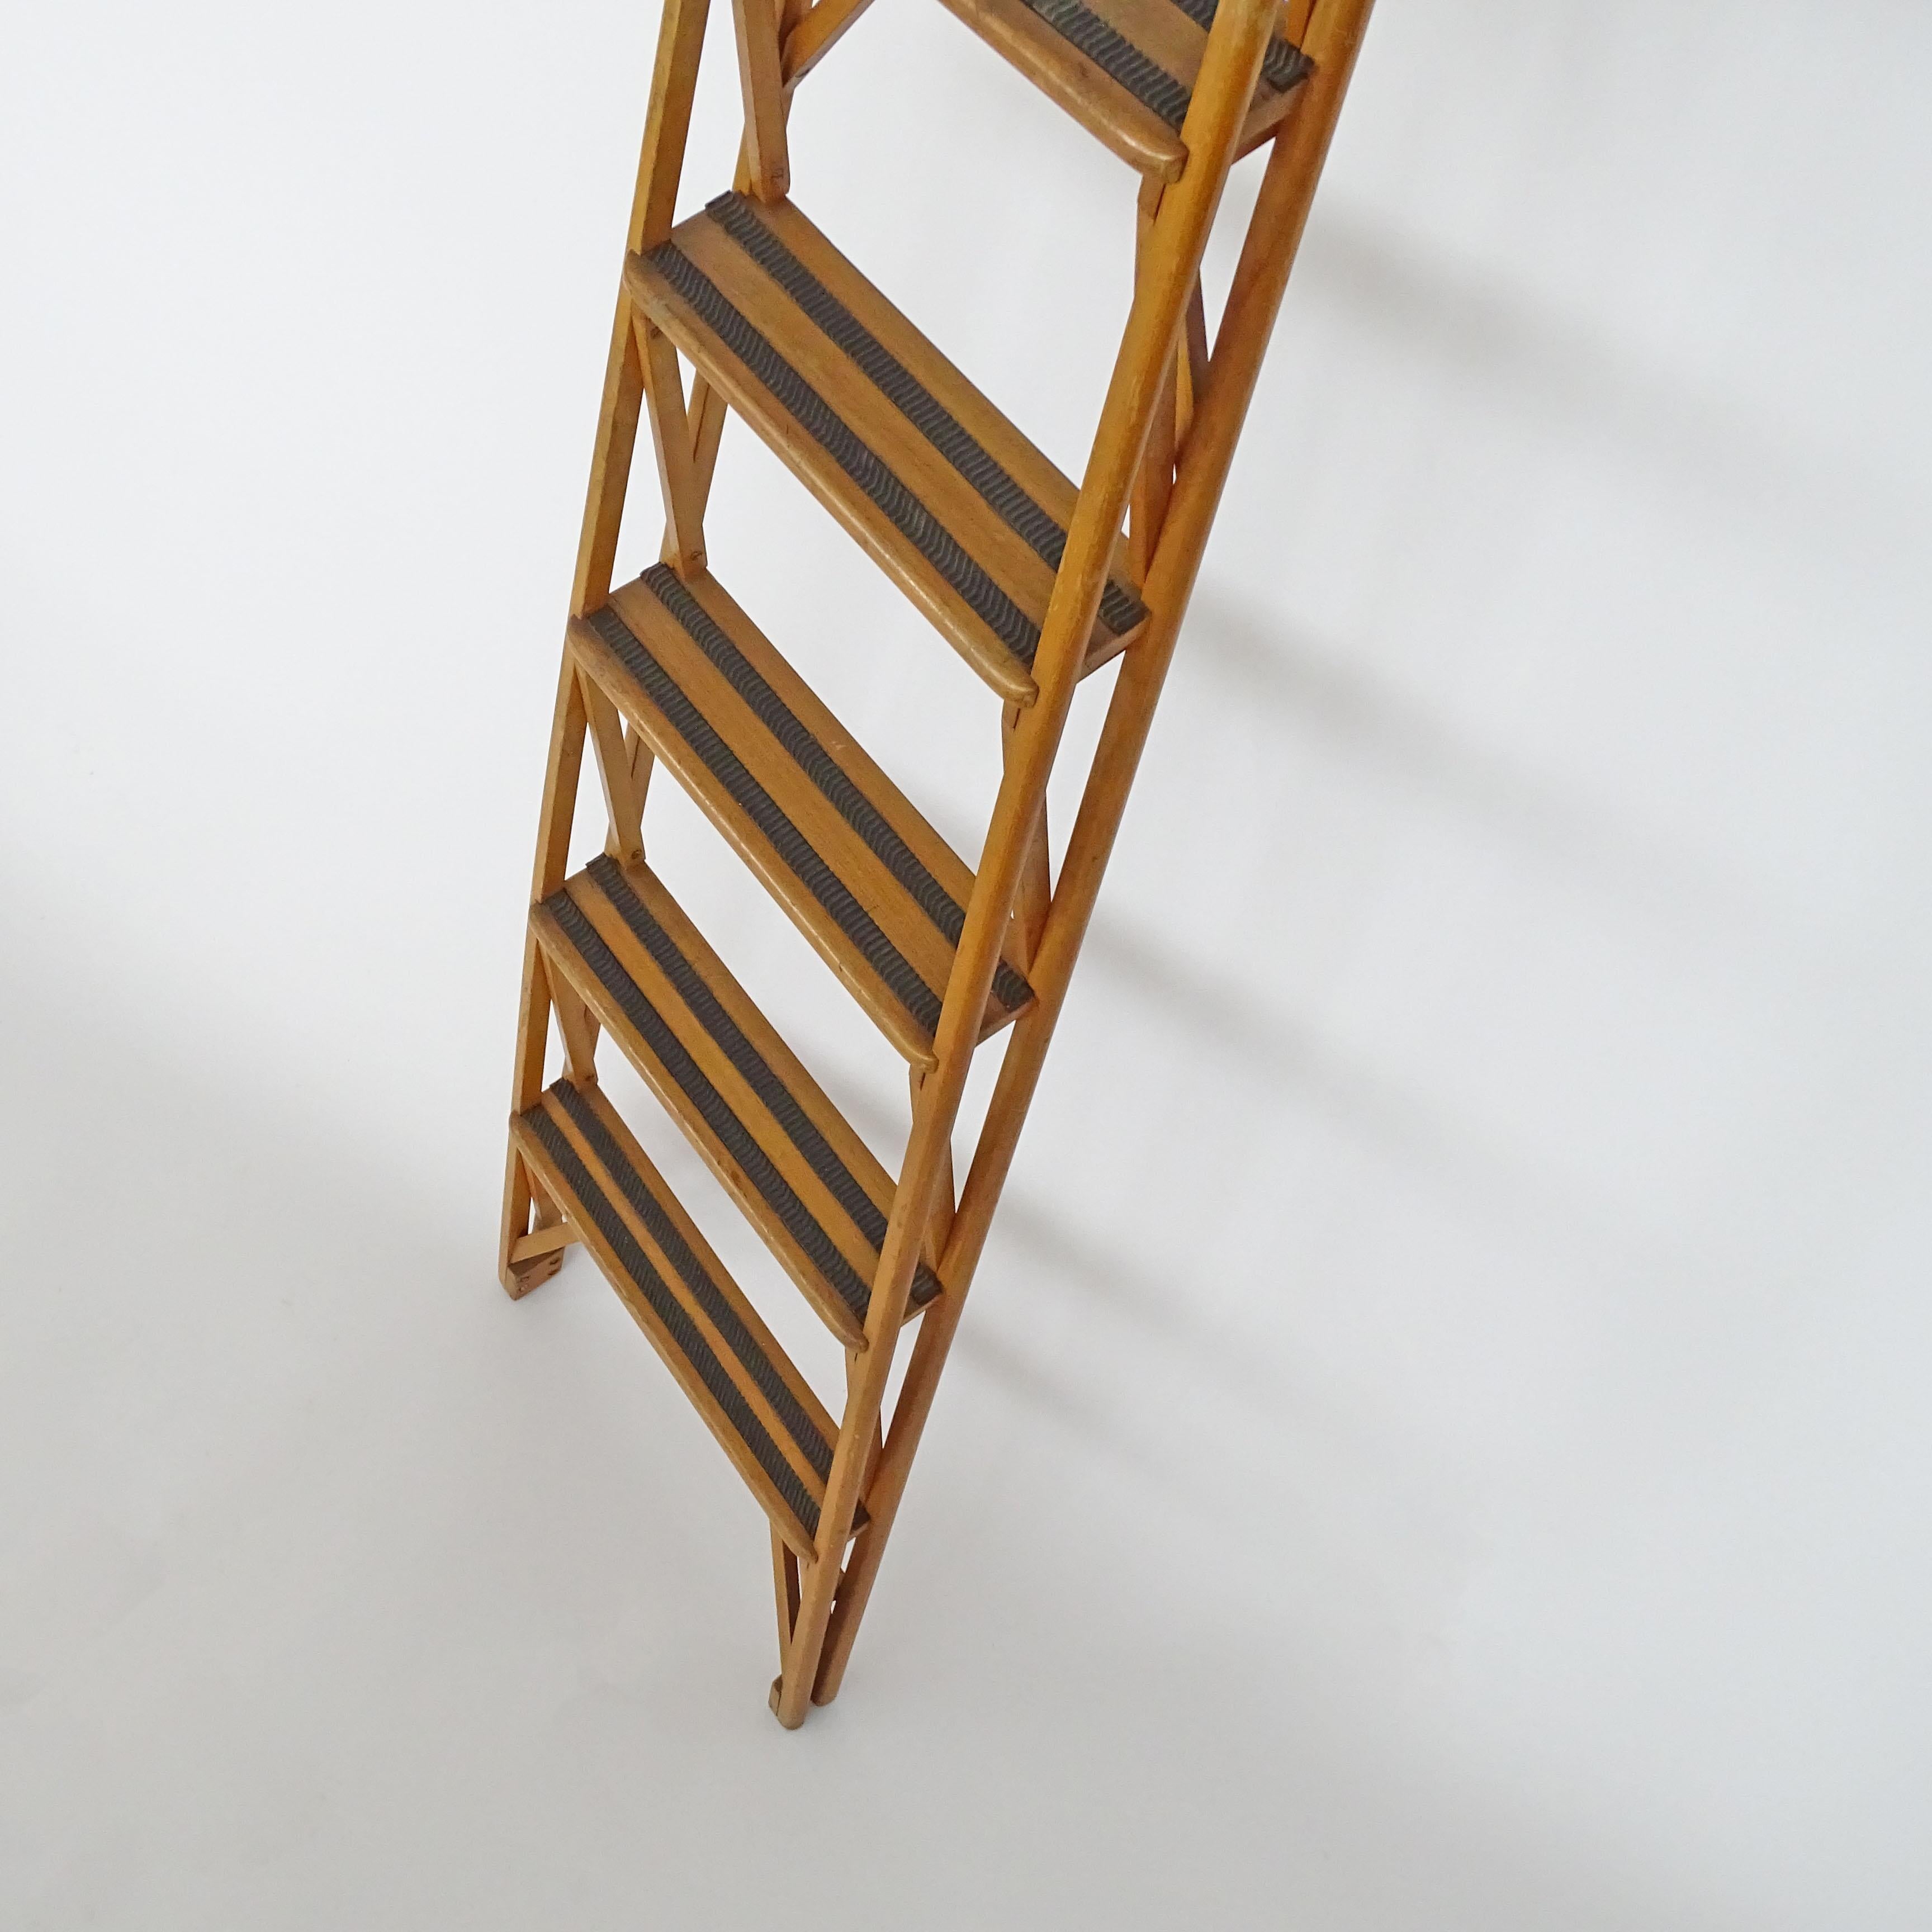 Mid-Century Modern Italian Architectural Library Ladder Attributed to Franco Albini, 1950s For Sale